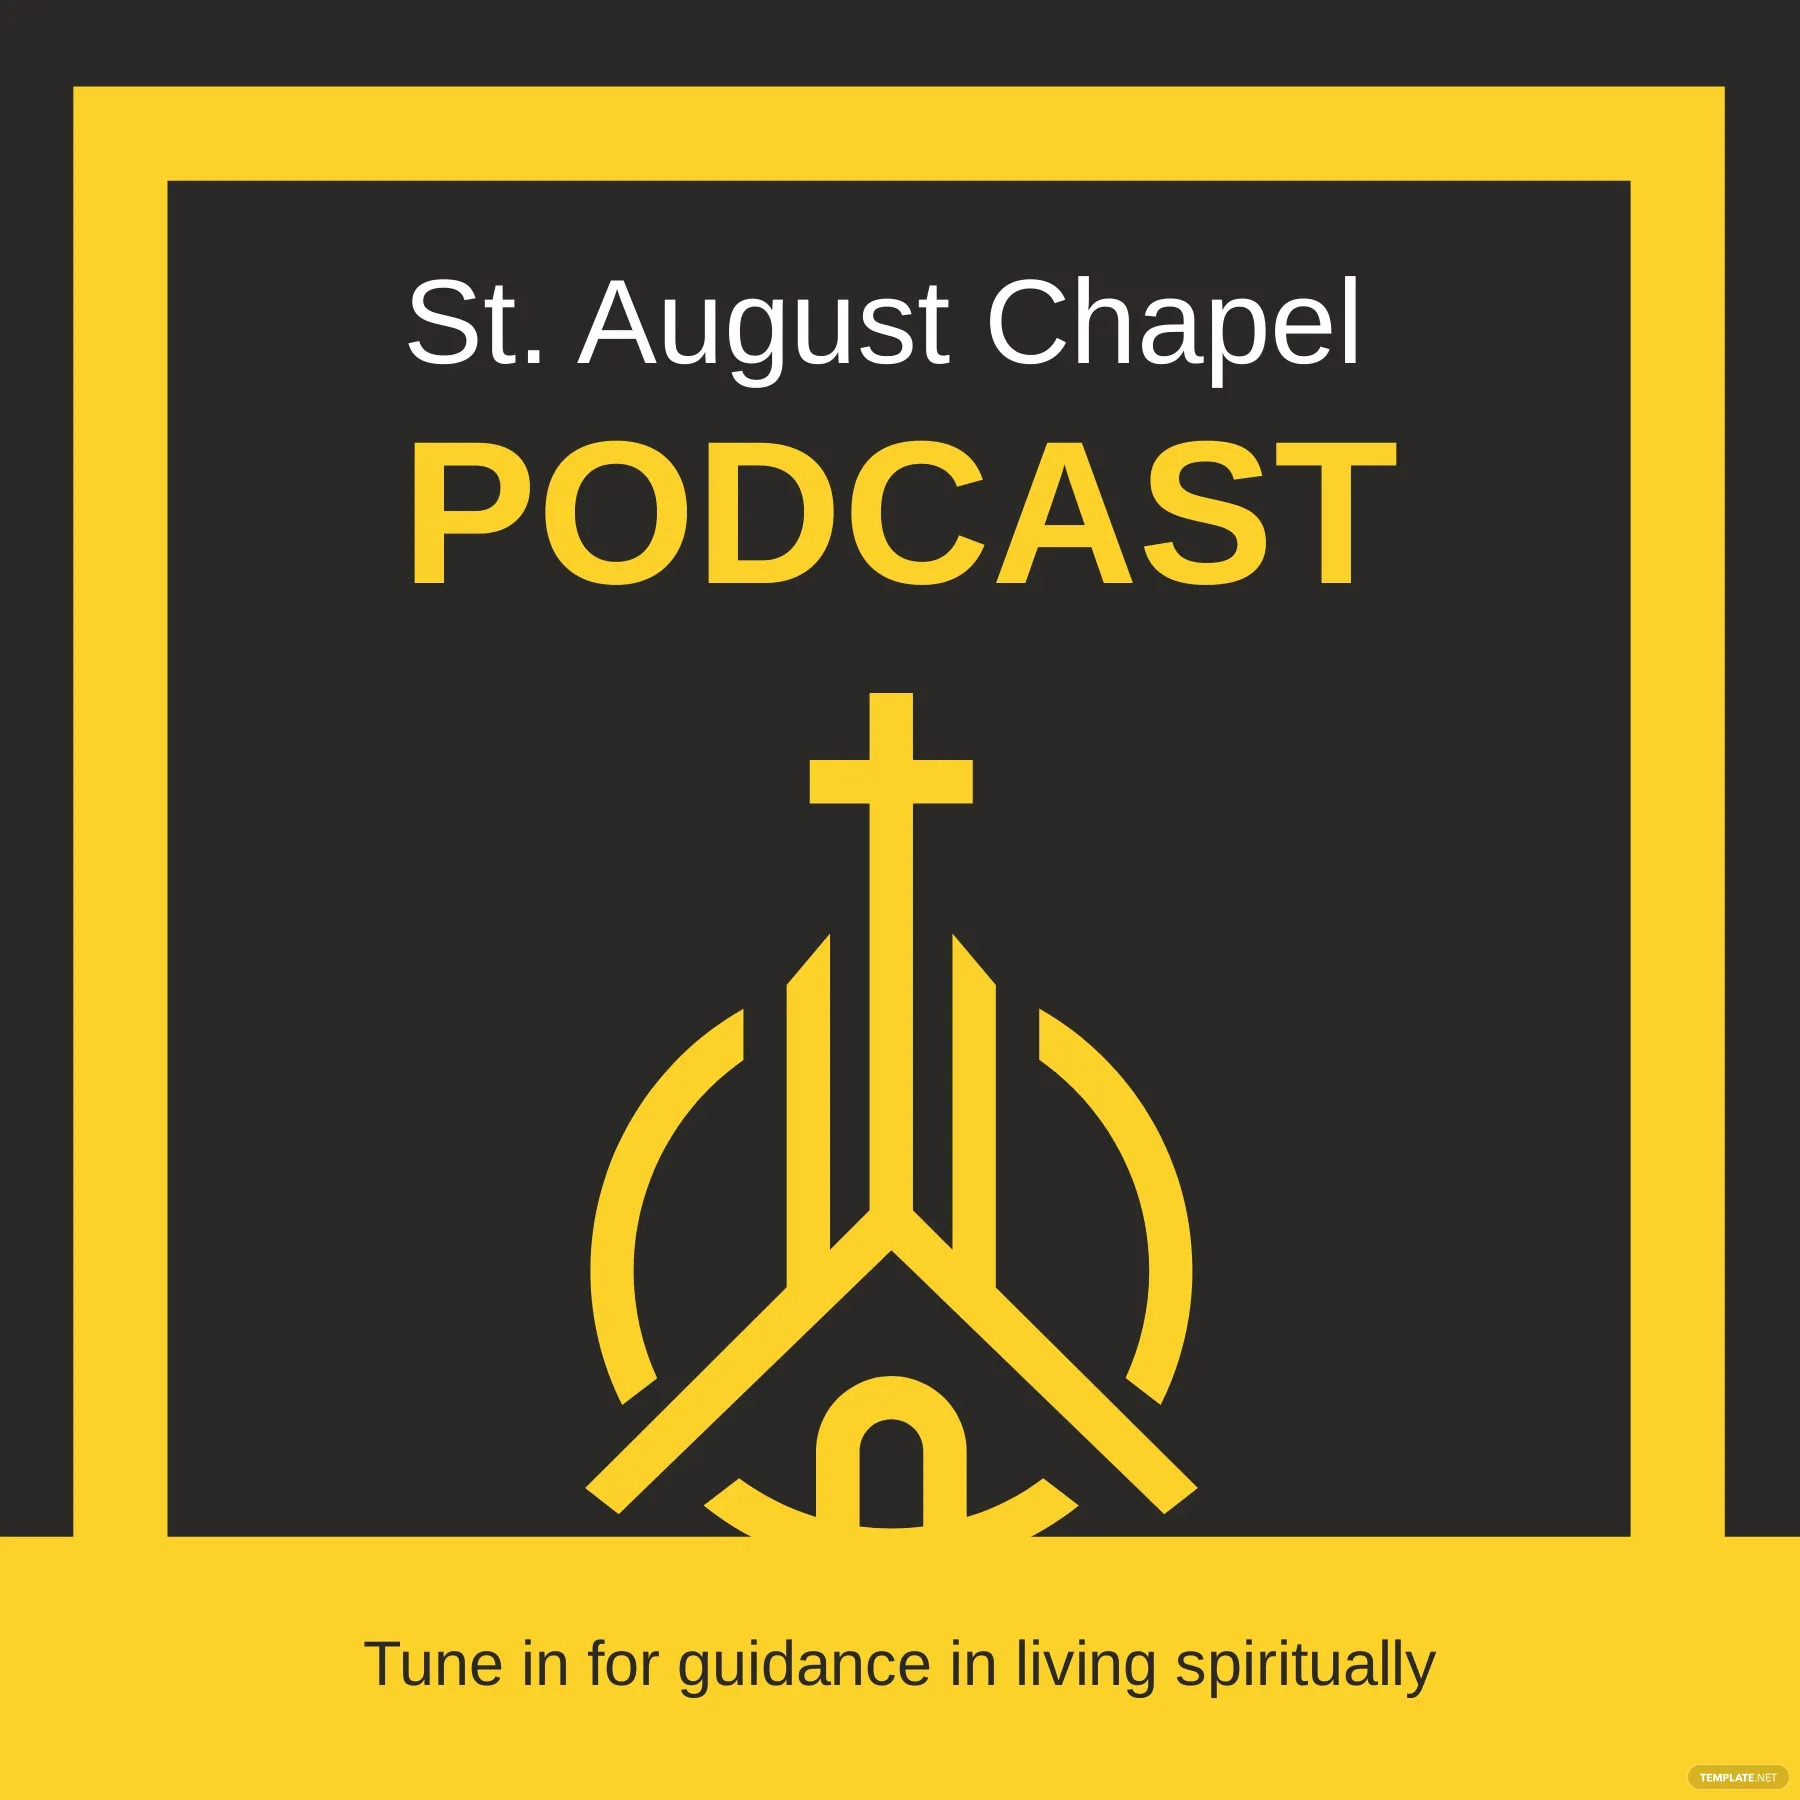 church podcast cover ideas and examples